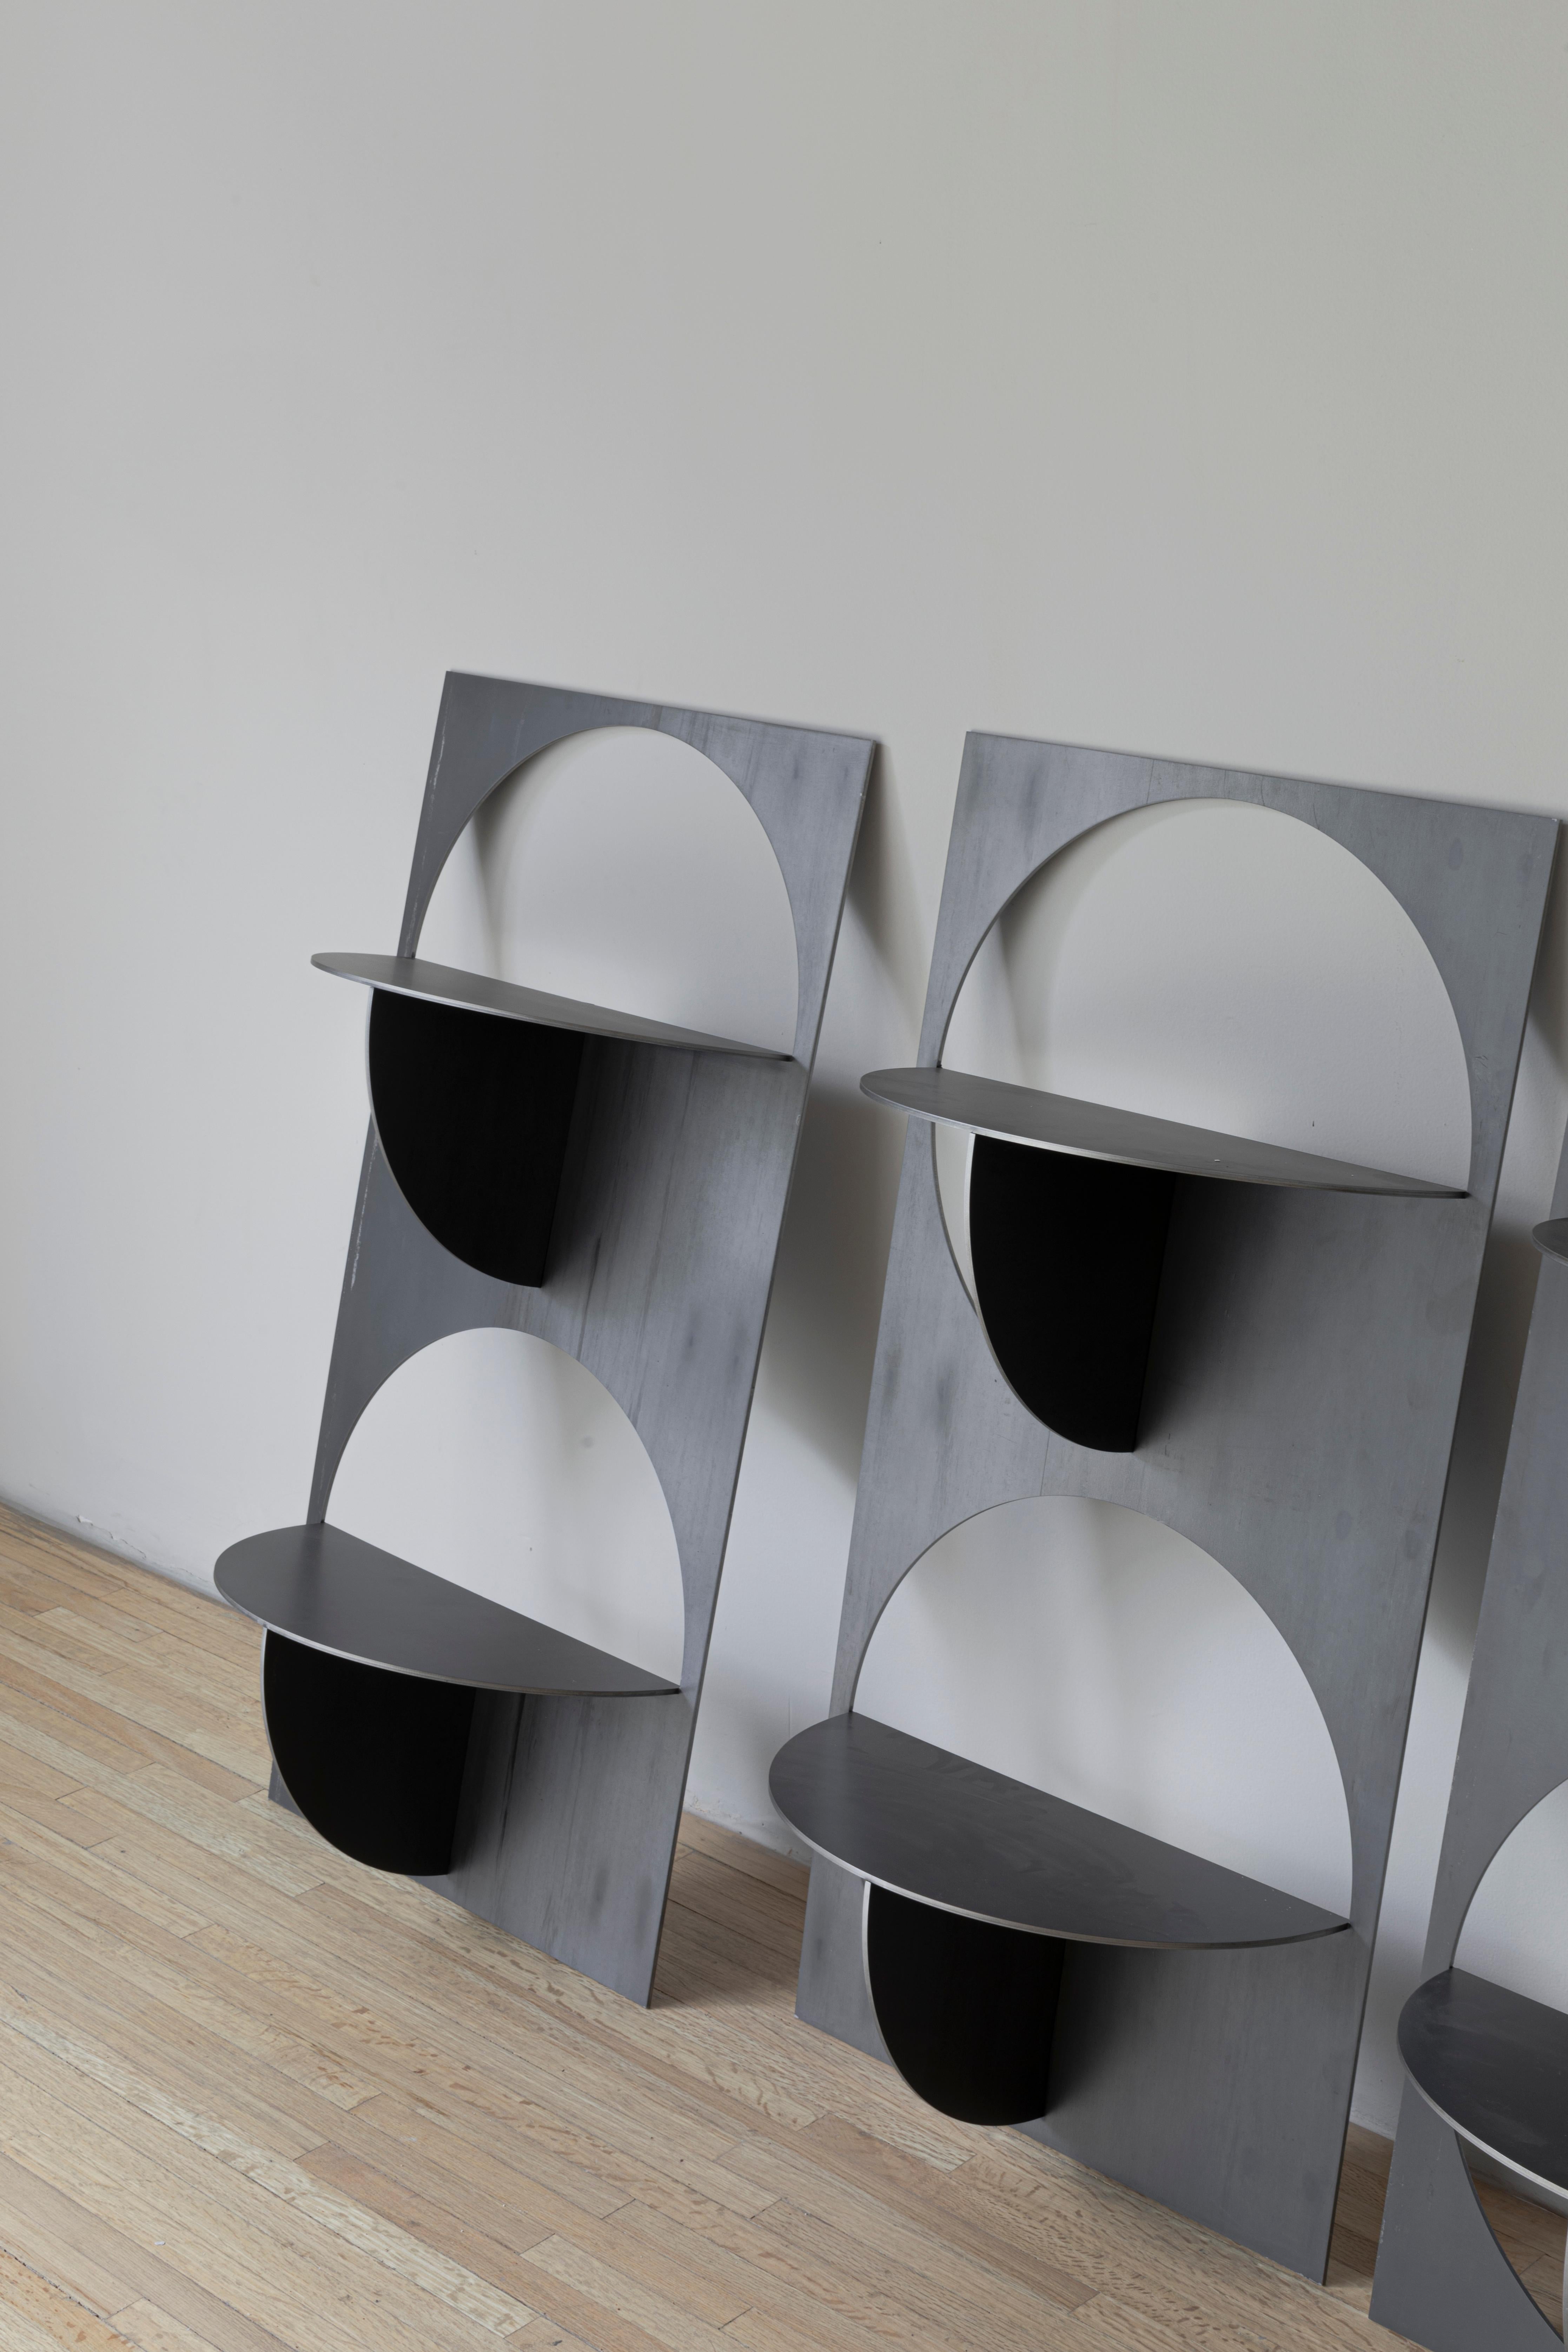 OBJ-04 Modular shelving by Manu Bano
One module
Dimensions: 50 L X 40 W X 100 H cm
Material: Steel

Manu Bano is co-founder of the design studio Ewe and Associate of the renowned furniture, interior design and architecture firm, Esrawe Studio,